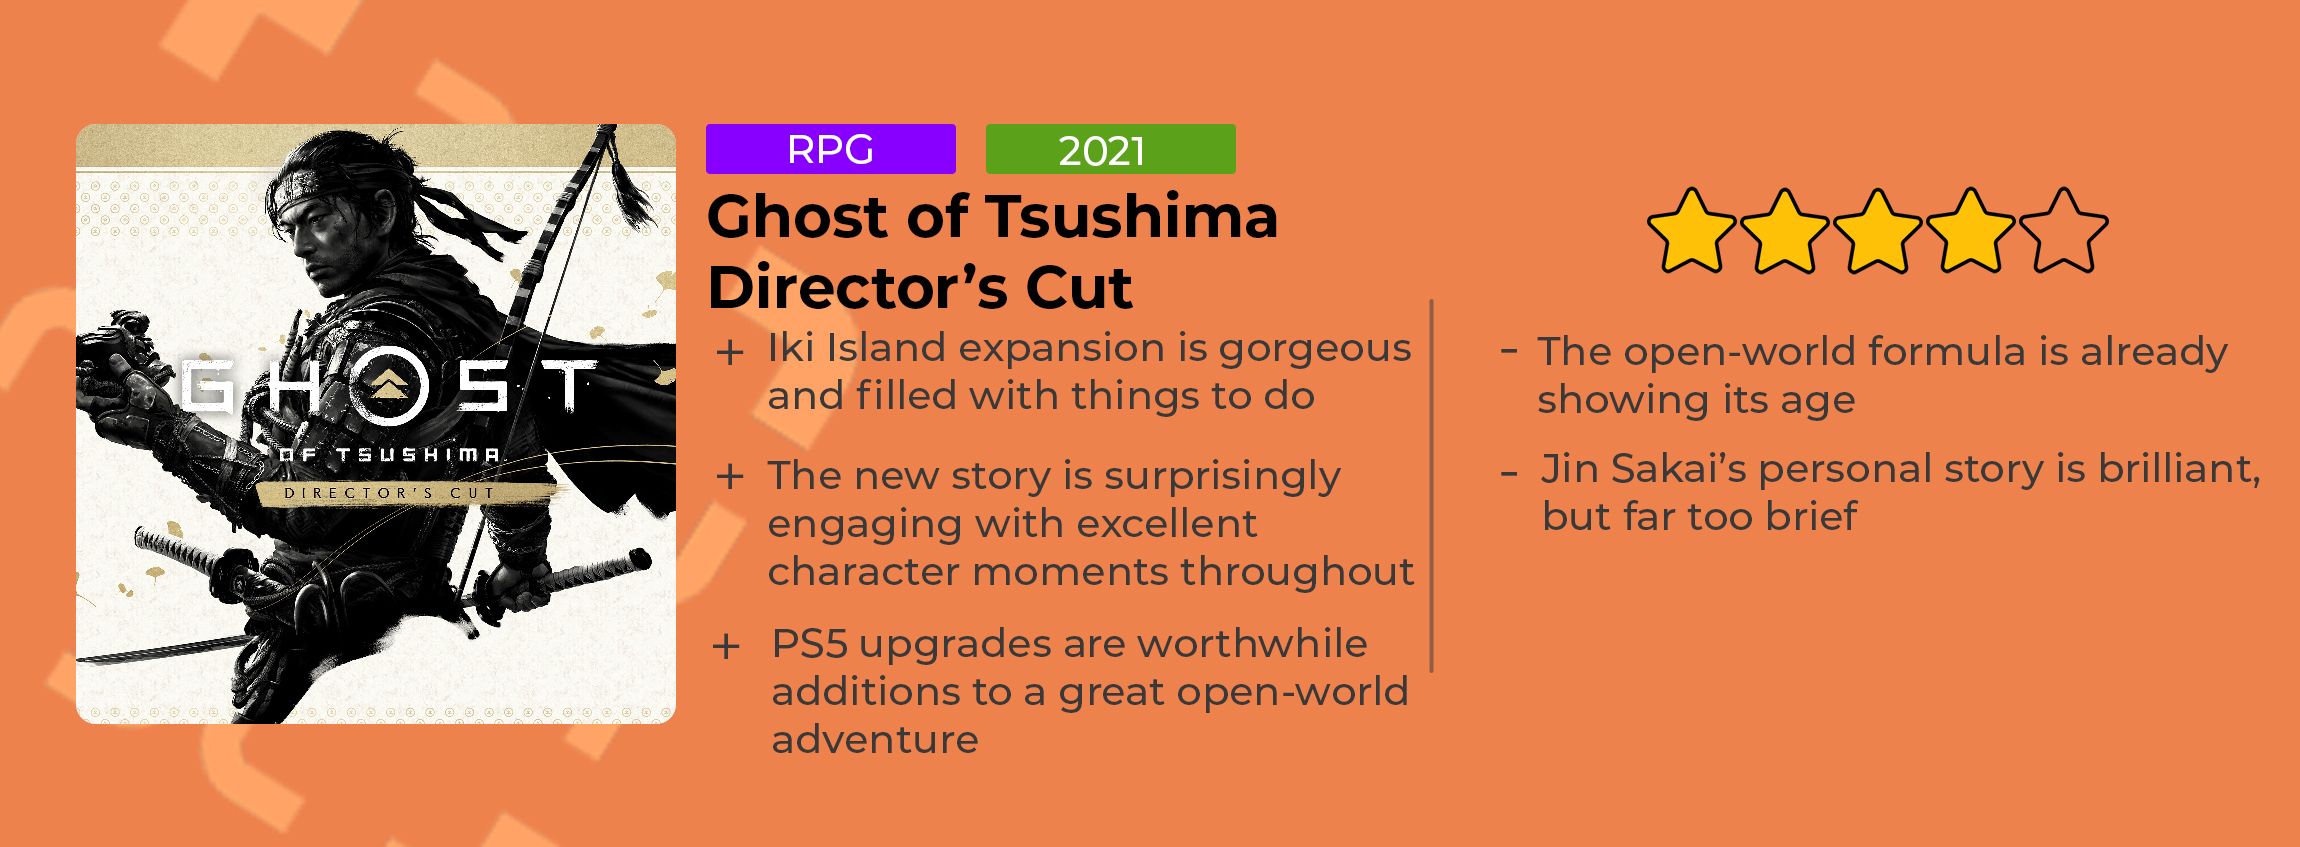 Review: Ghost of Tsushima Director's Cut stands toe-to-toe with the PS5's  best